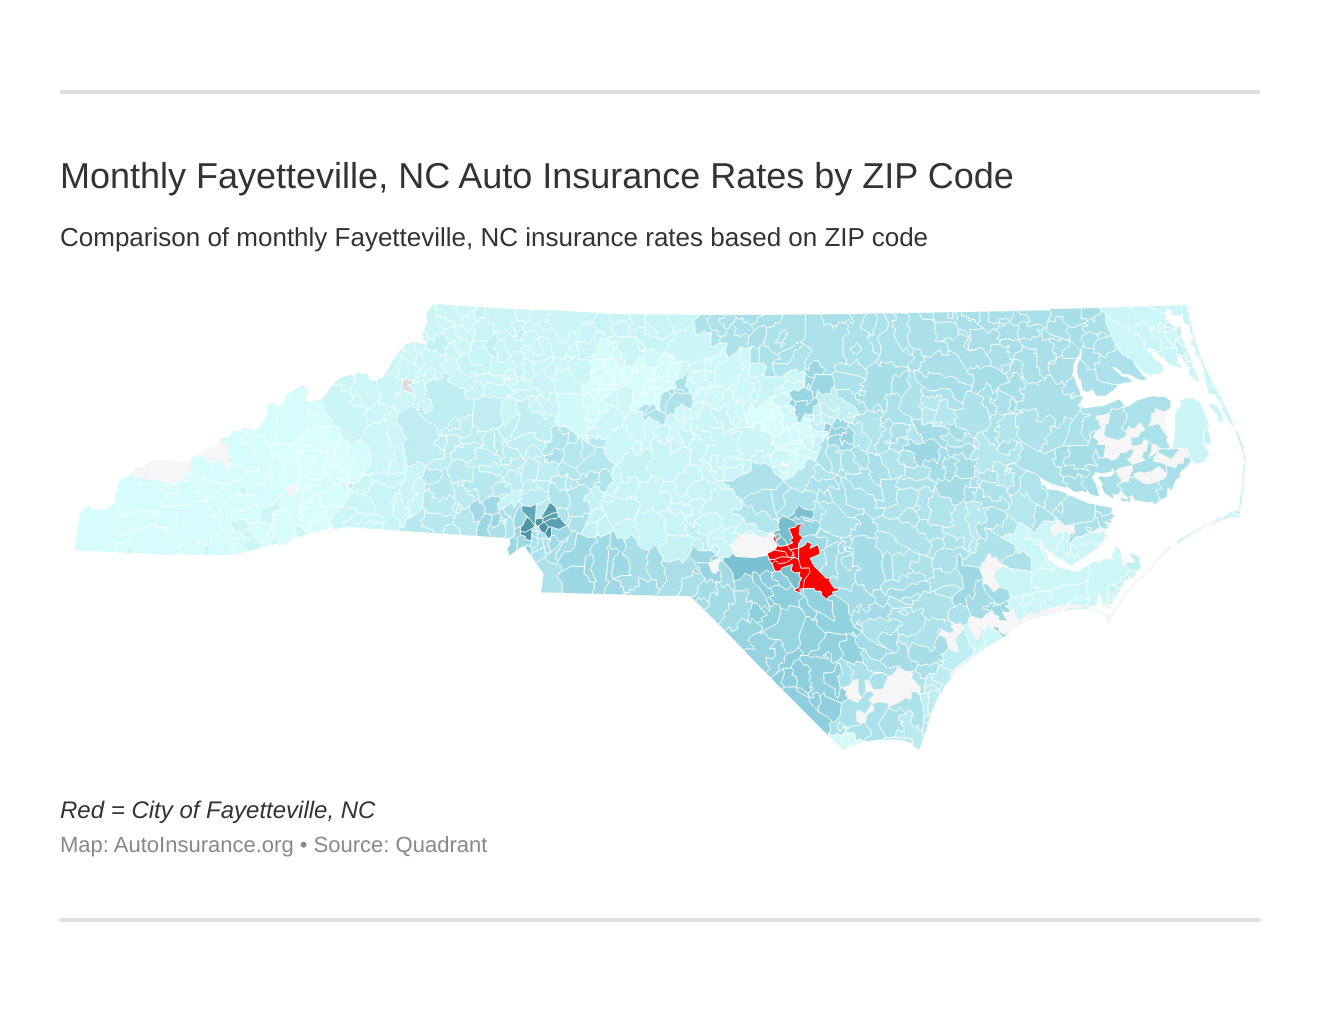 Monthly Fayetteville, NC Auto Insurance Rates by ZIP Code